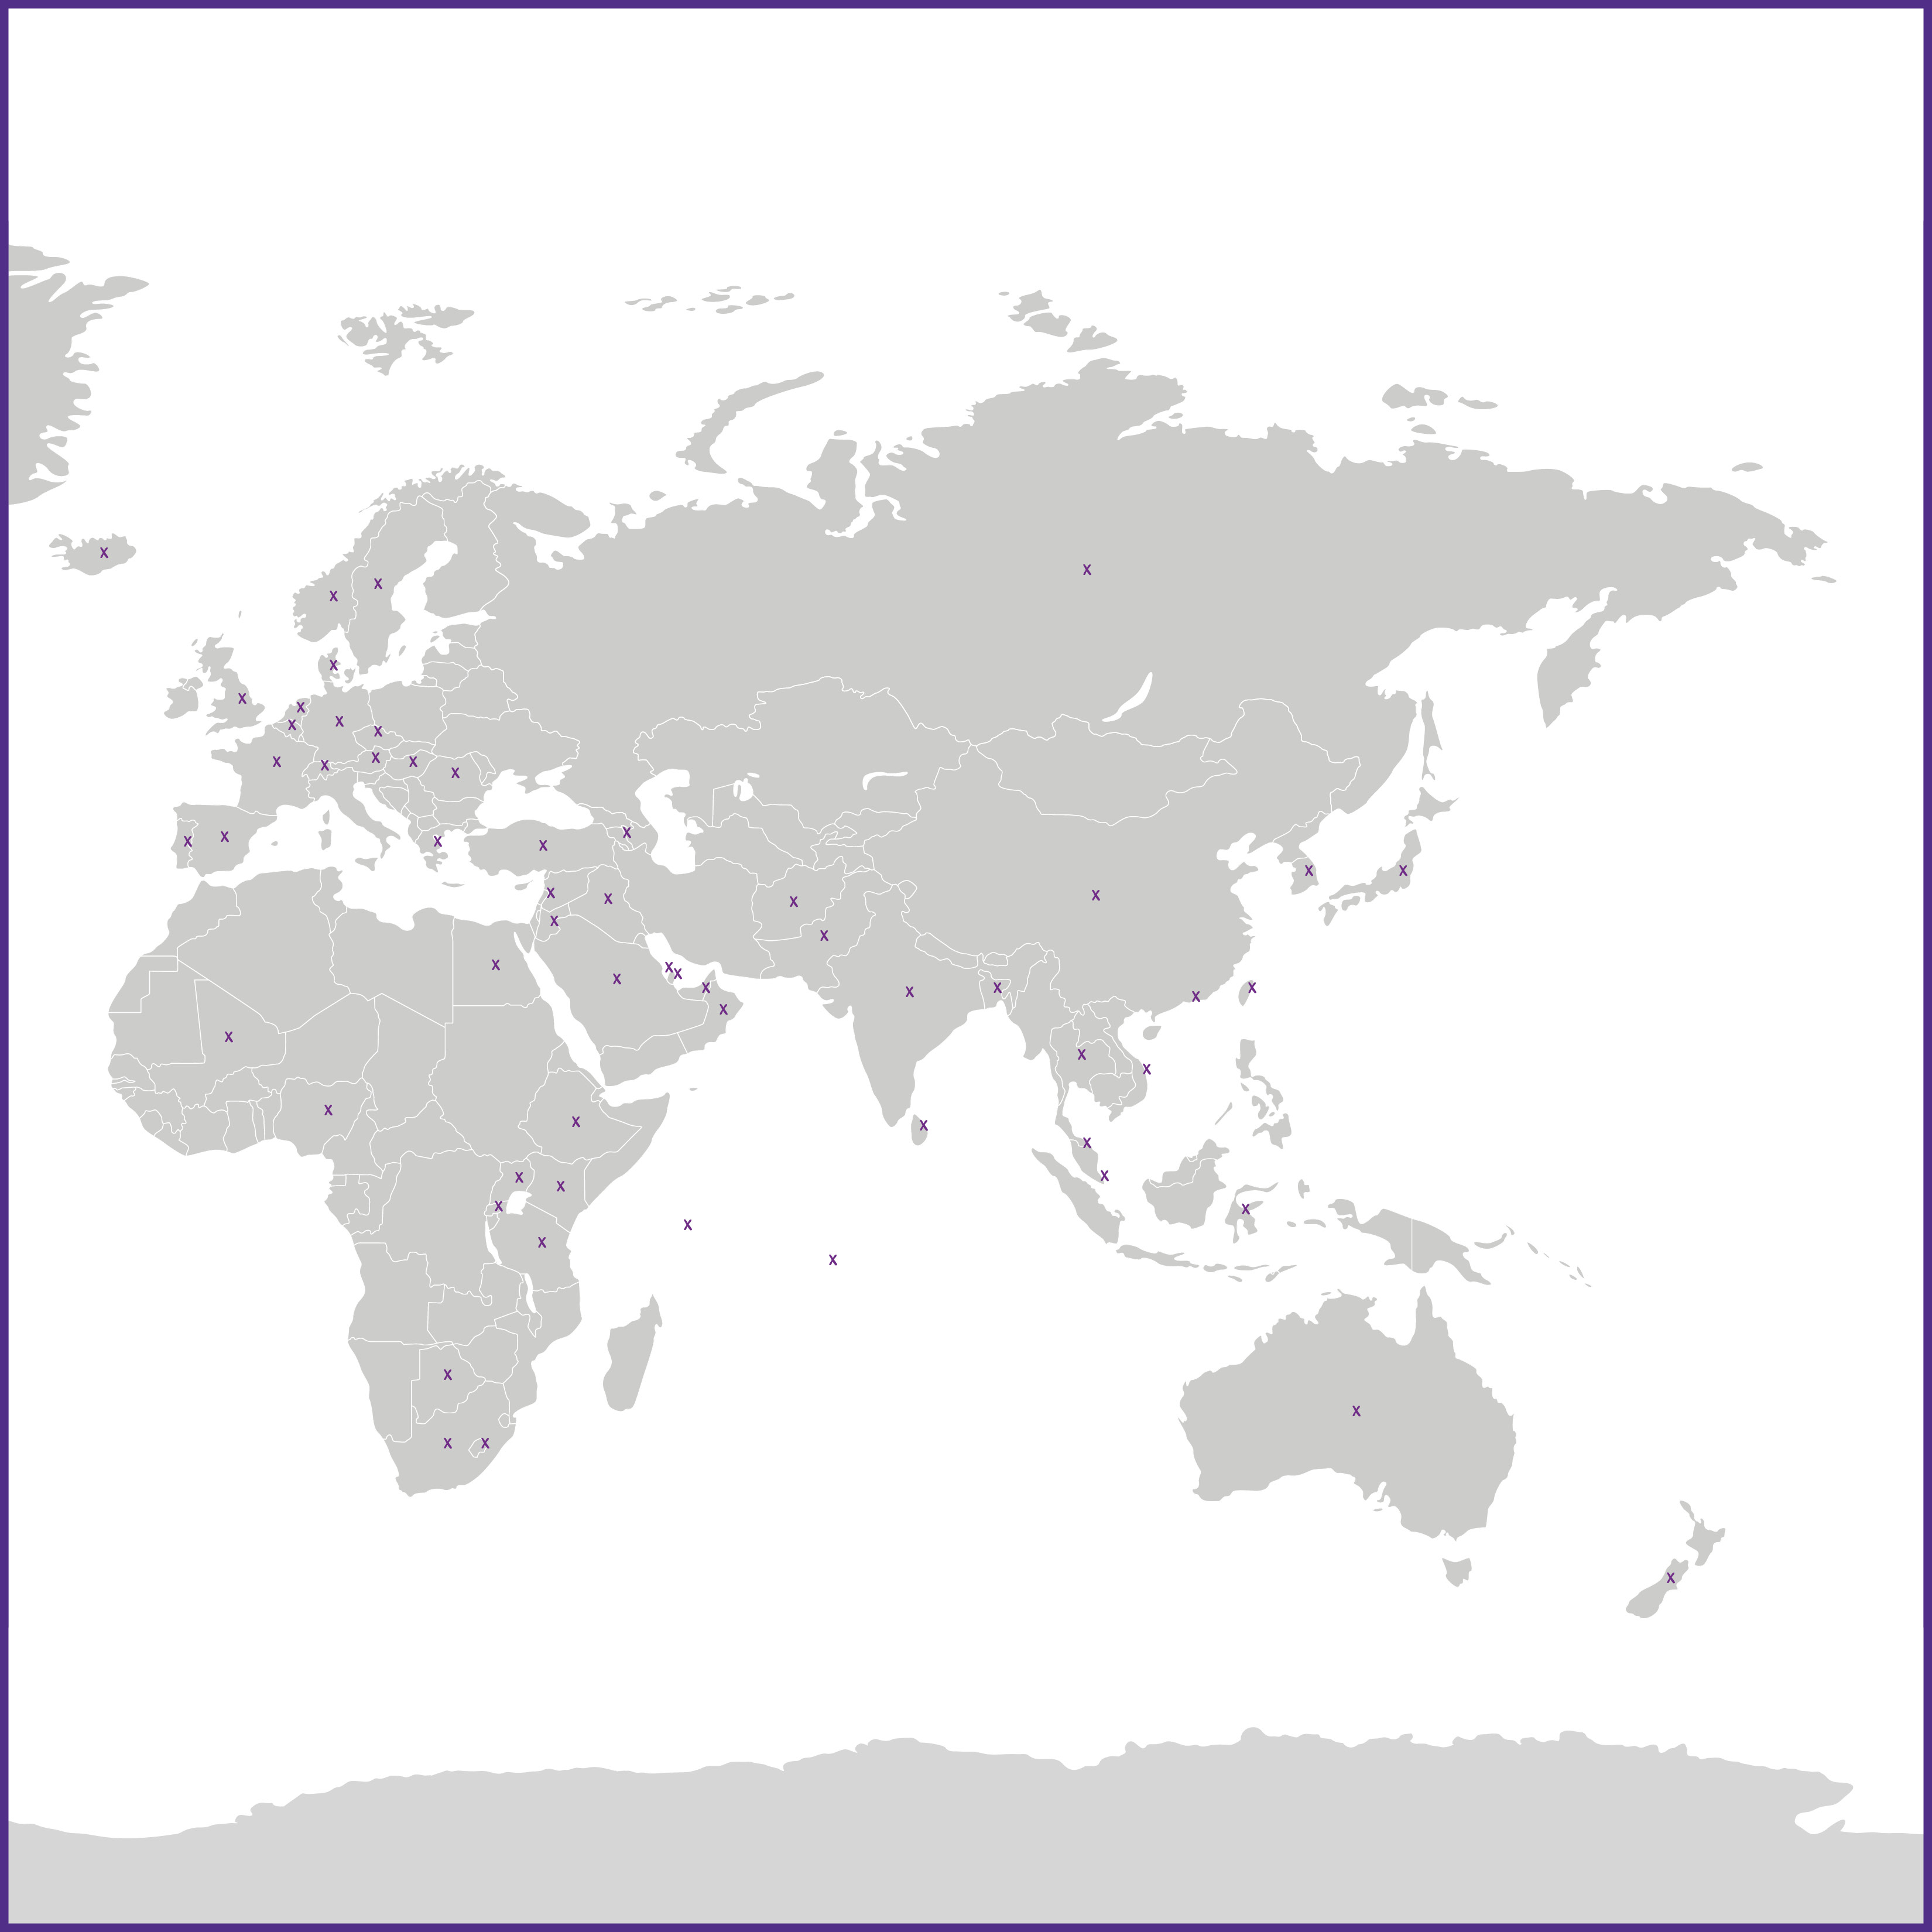 part 2 of world map showing alumni locales